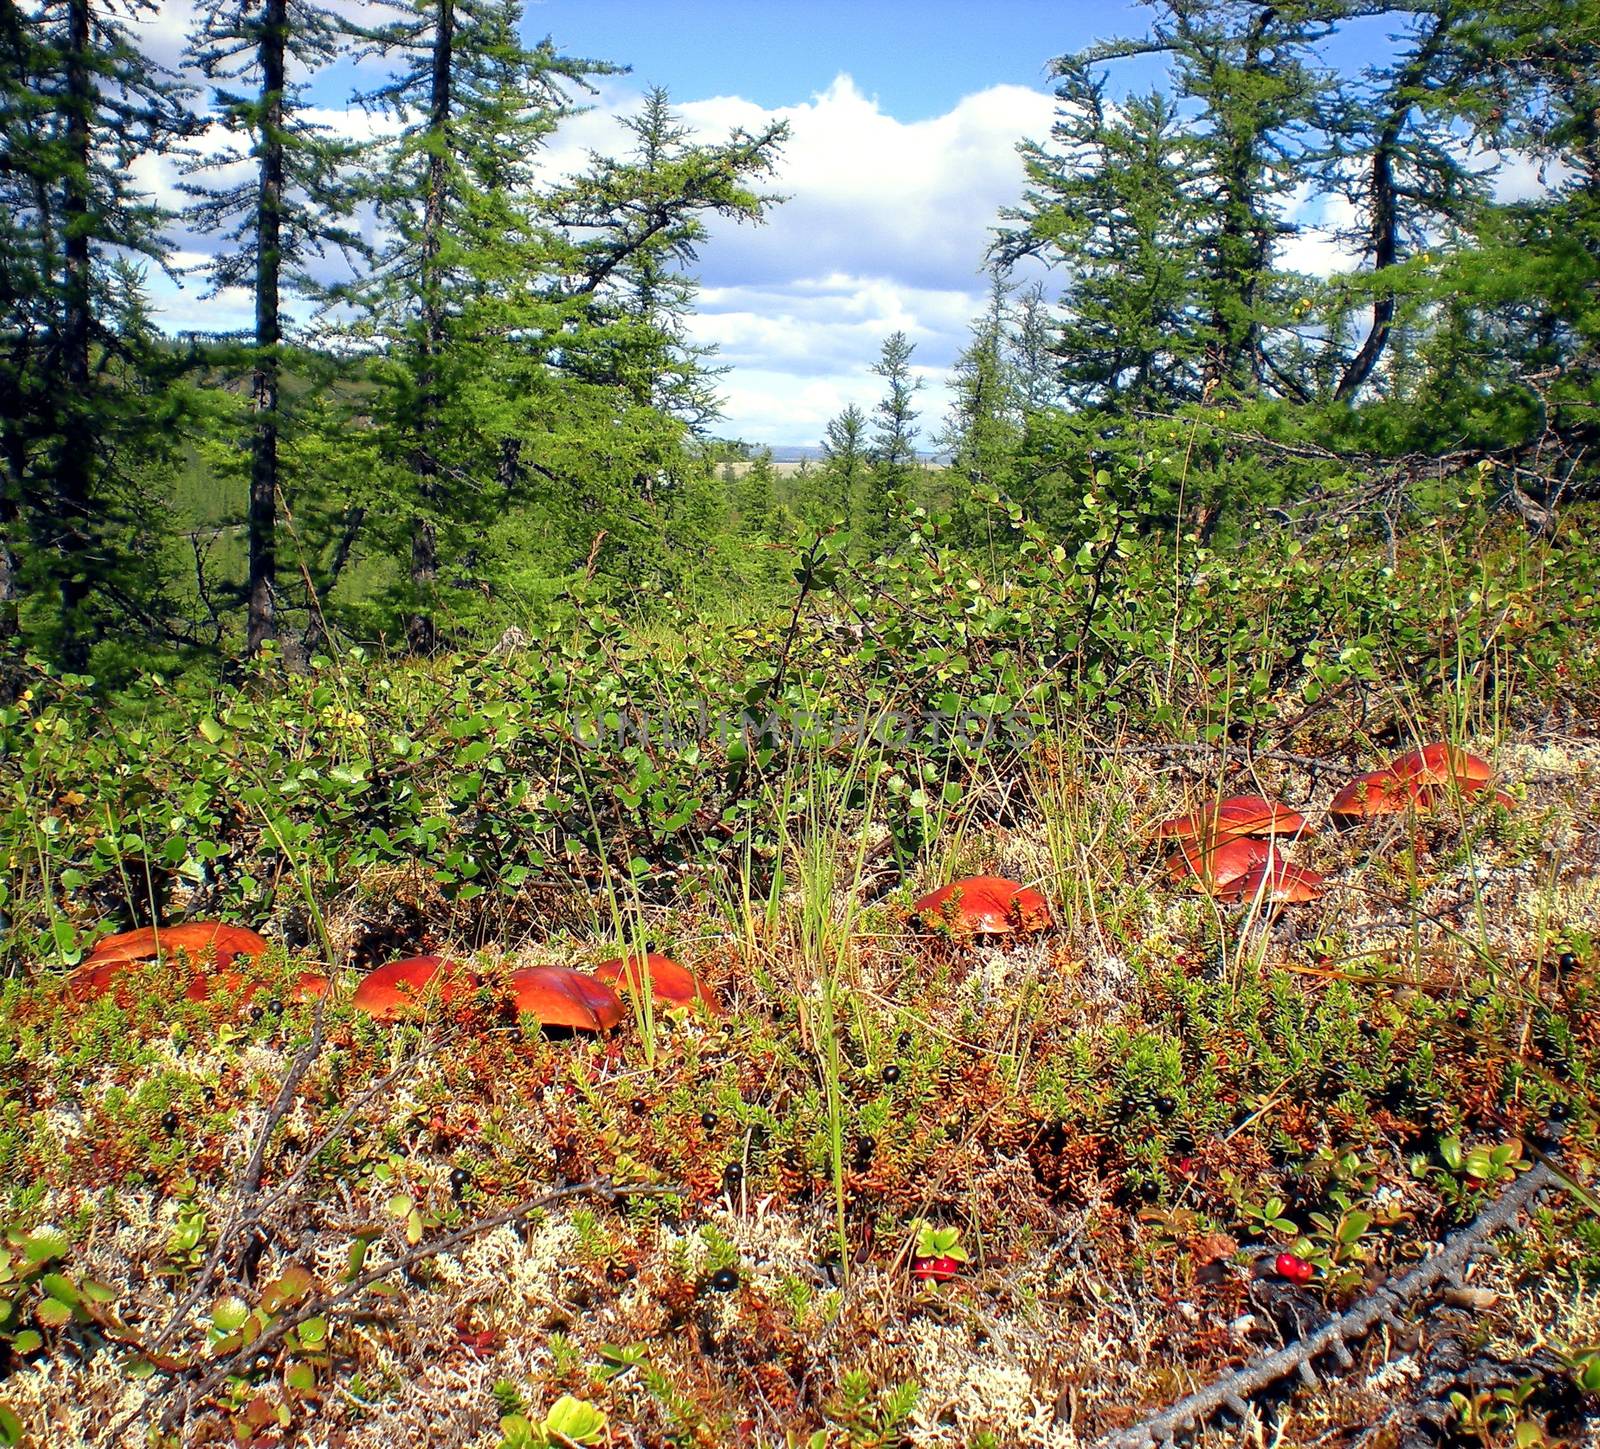 Large mushrooms in the grass in the taiga forest.